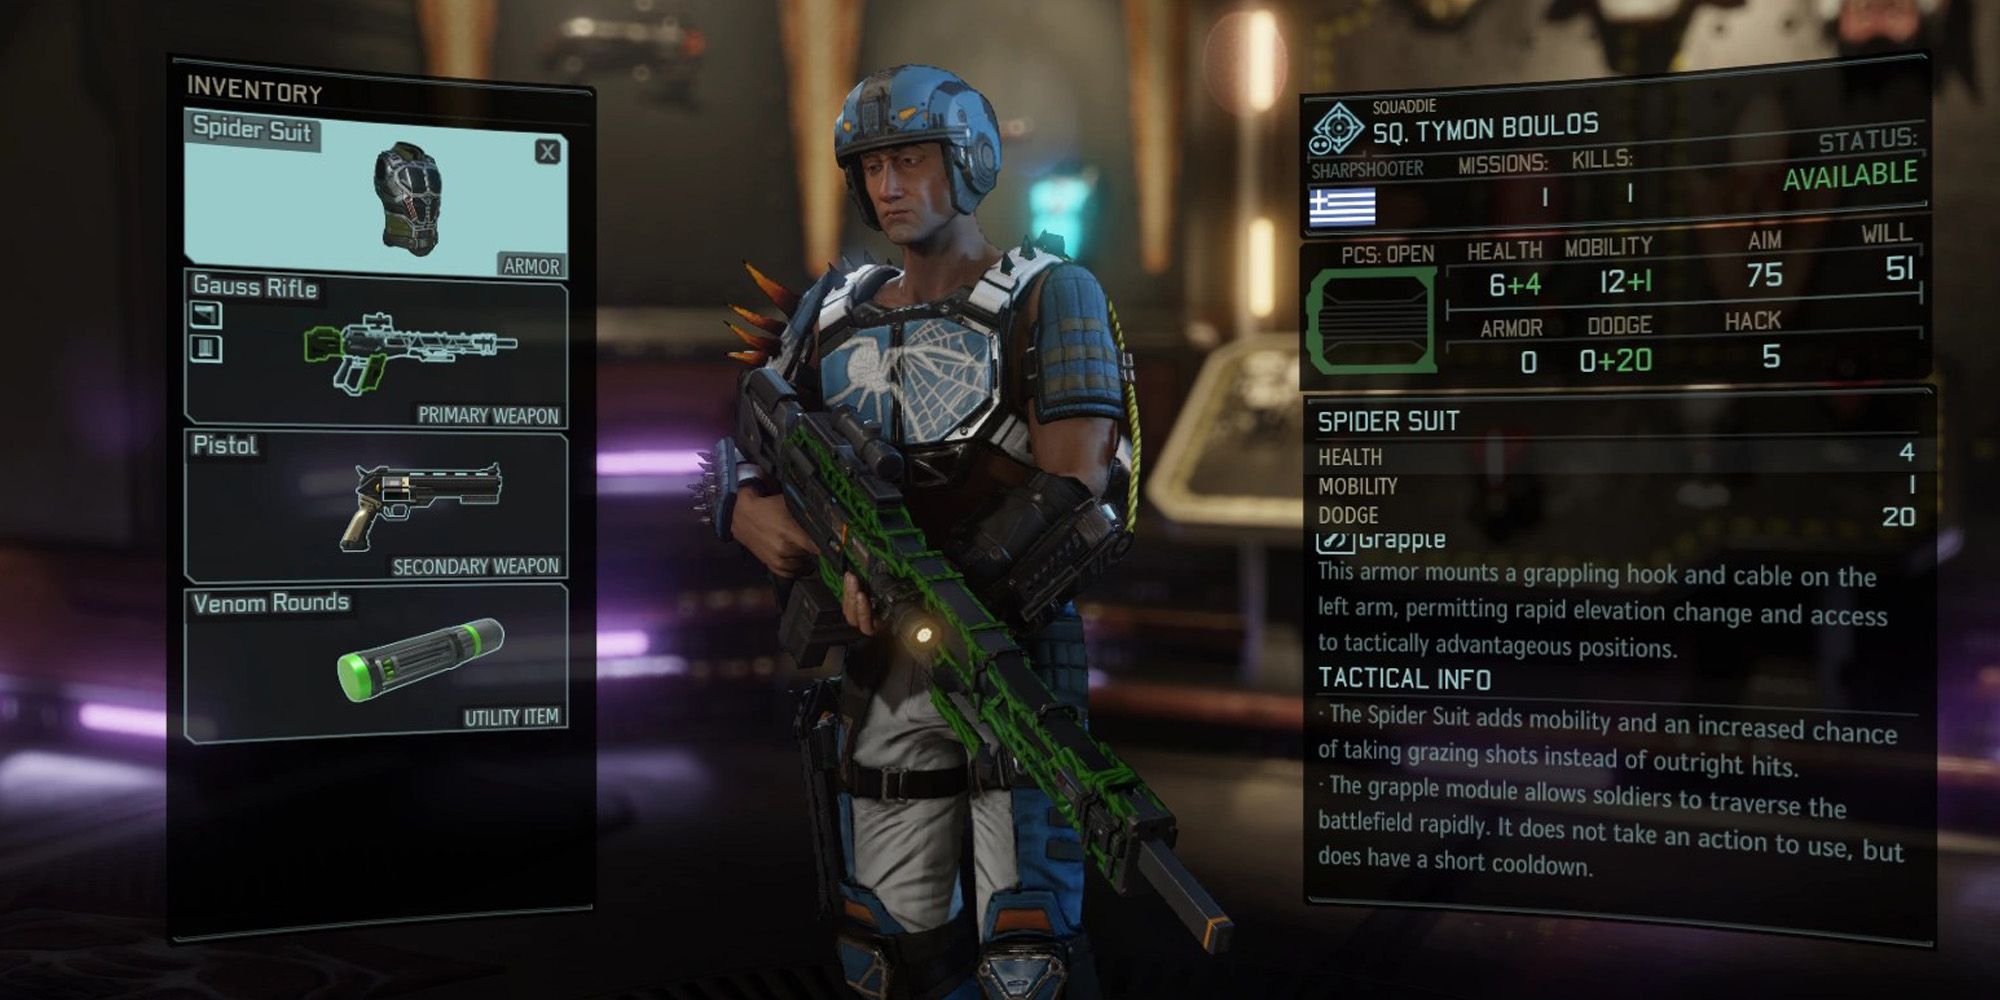 Xcom 2 Outfits, The arms are located in it's respective category